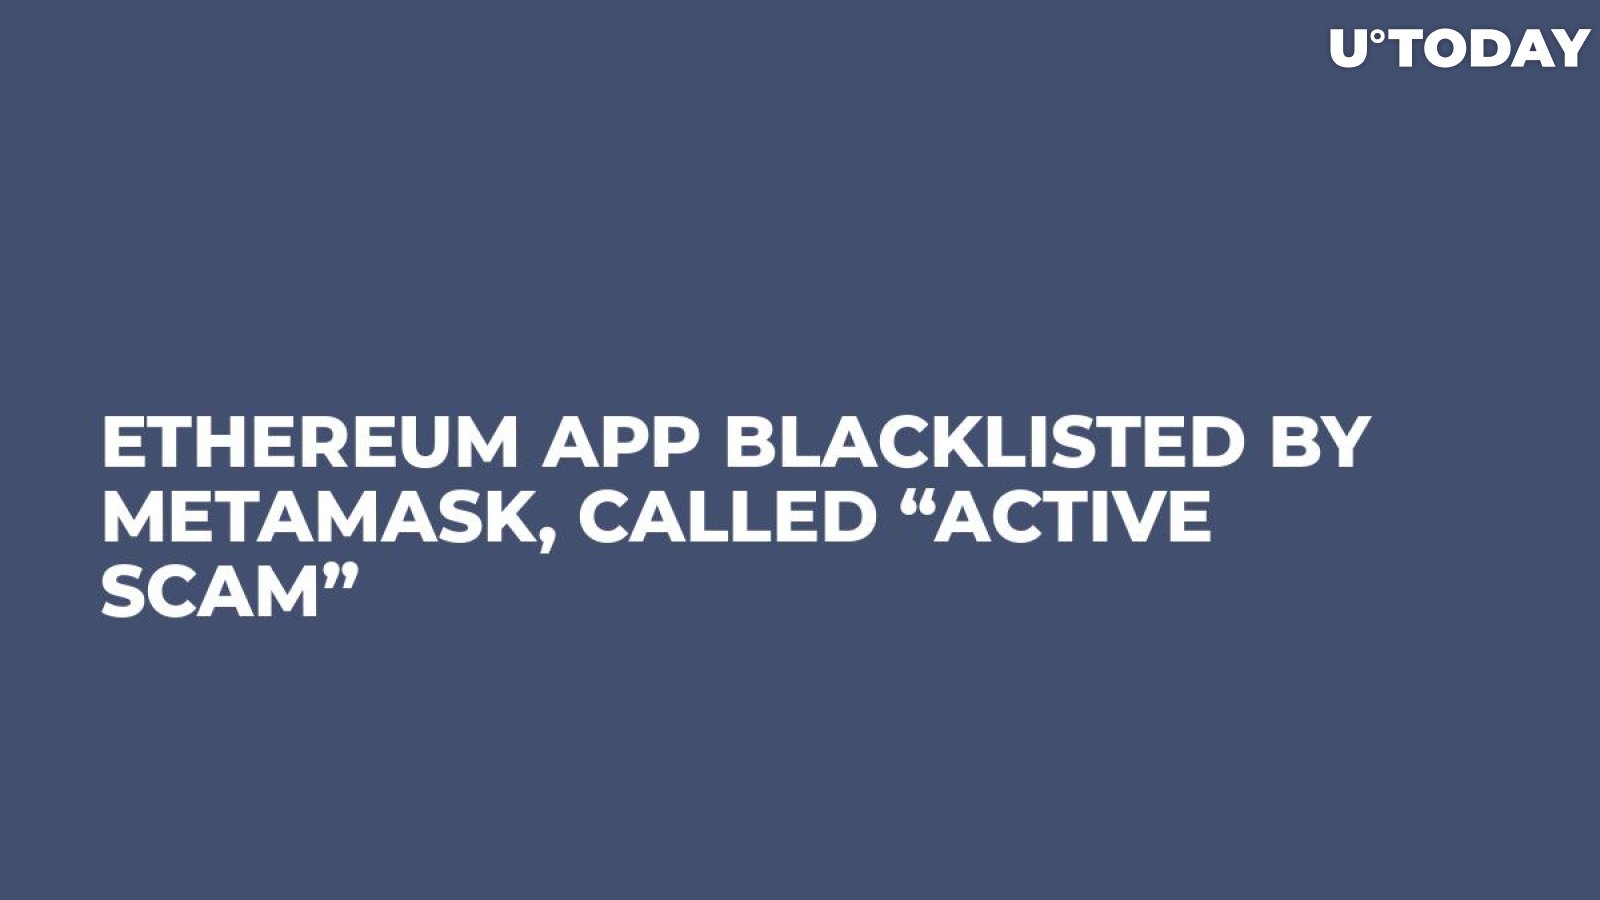 Ethereum App Blacklisted By MetaMask, Called “Active Scam”